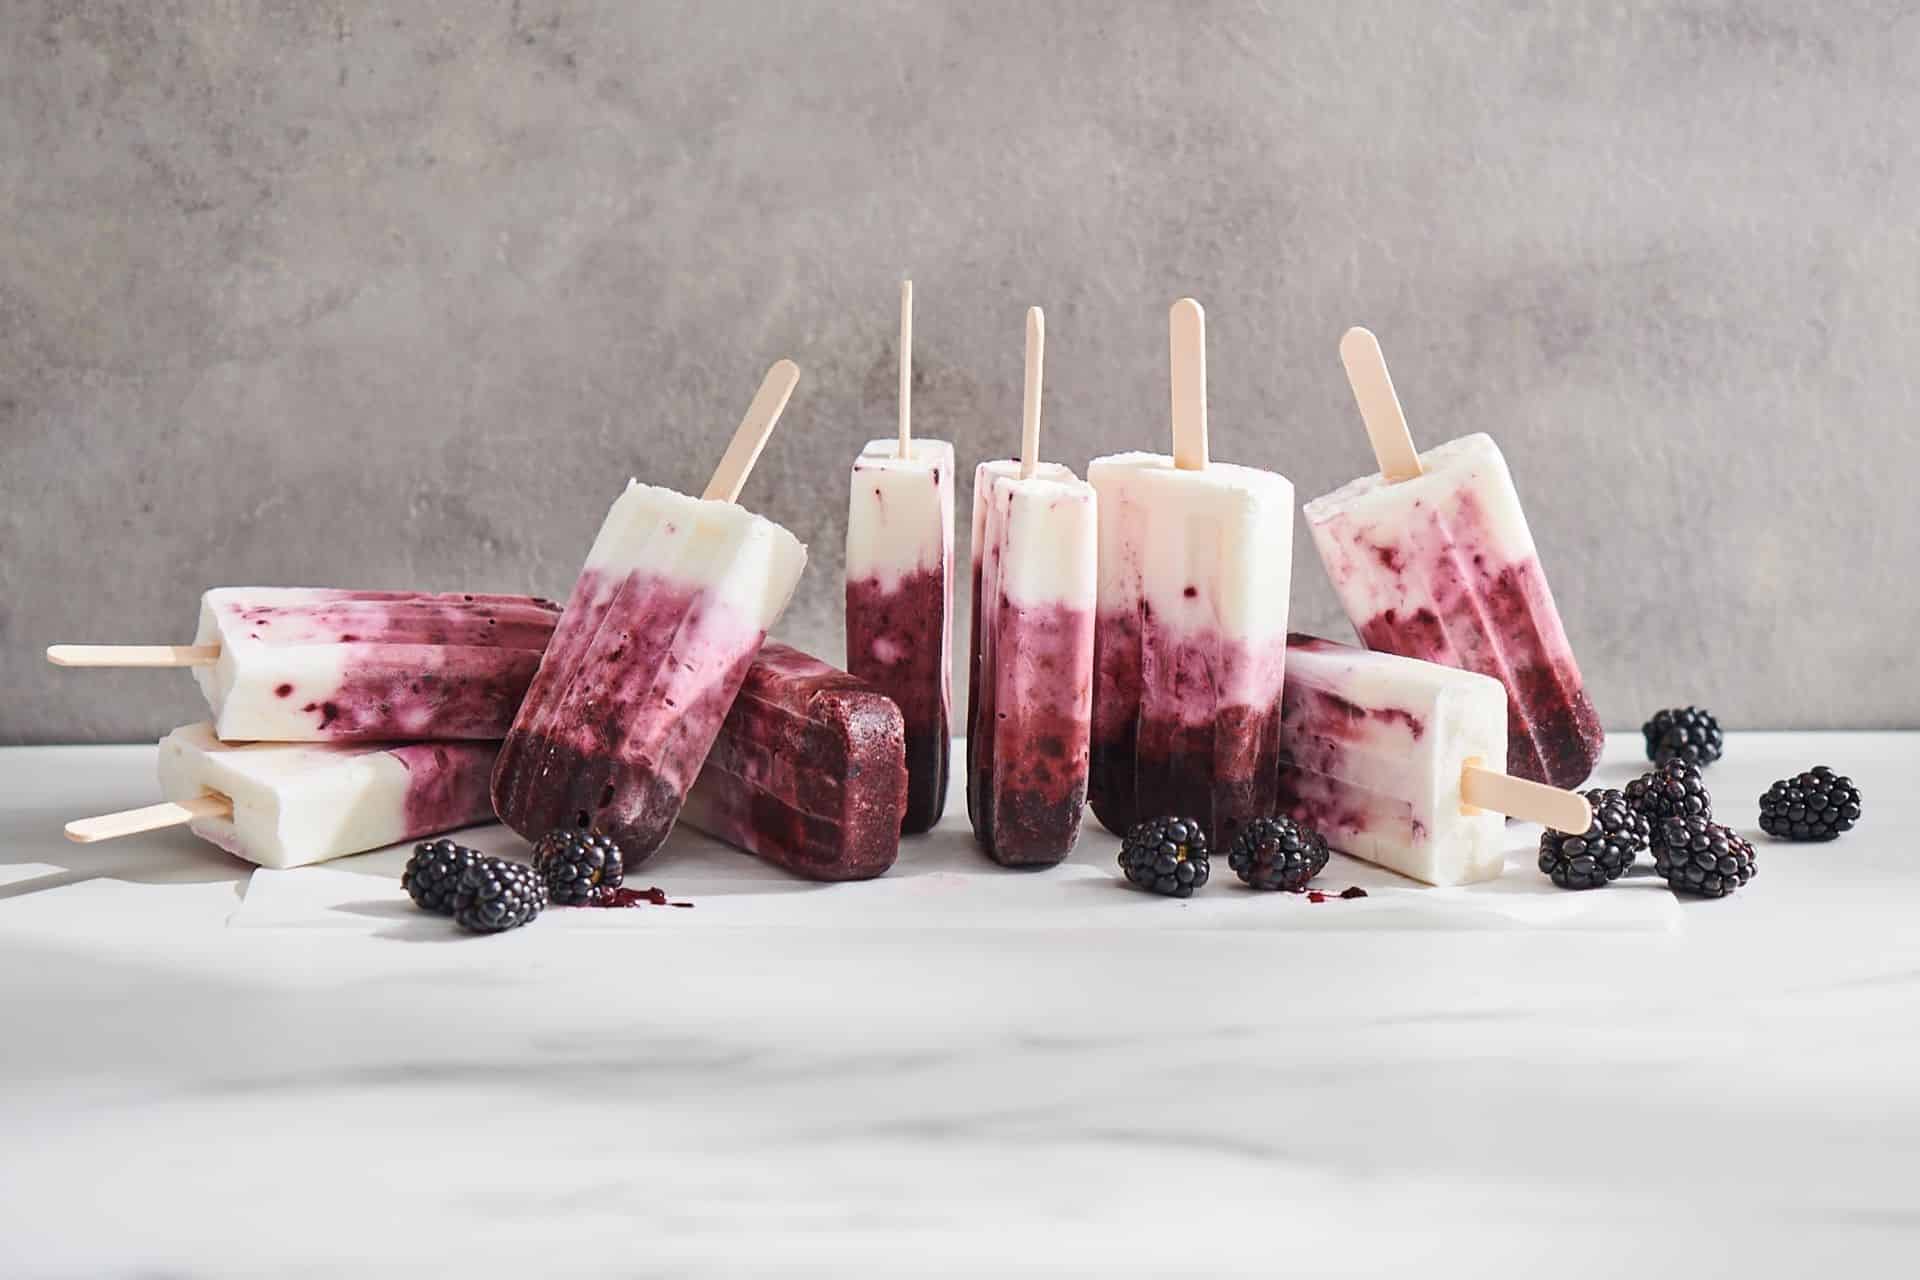 These 10 Easy Popsicle Recipes Are The Perfect Way To Cool Off This 4th of July